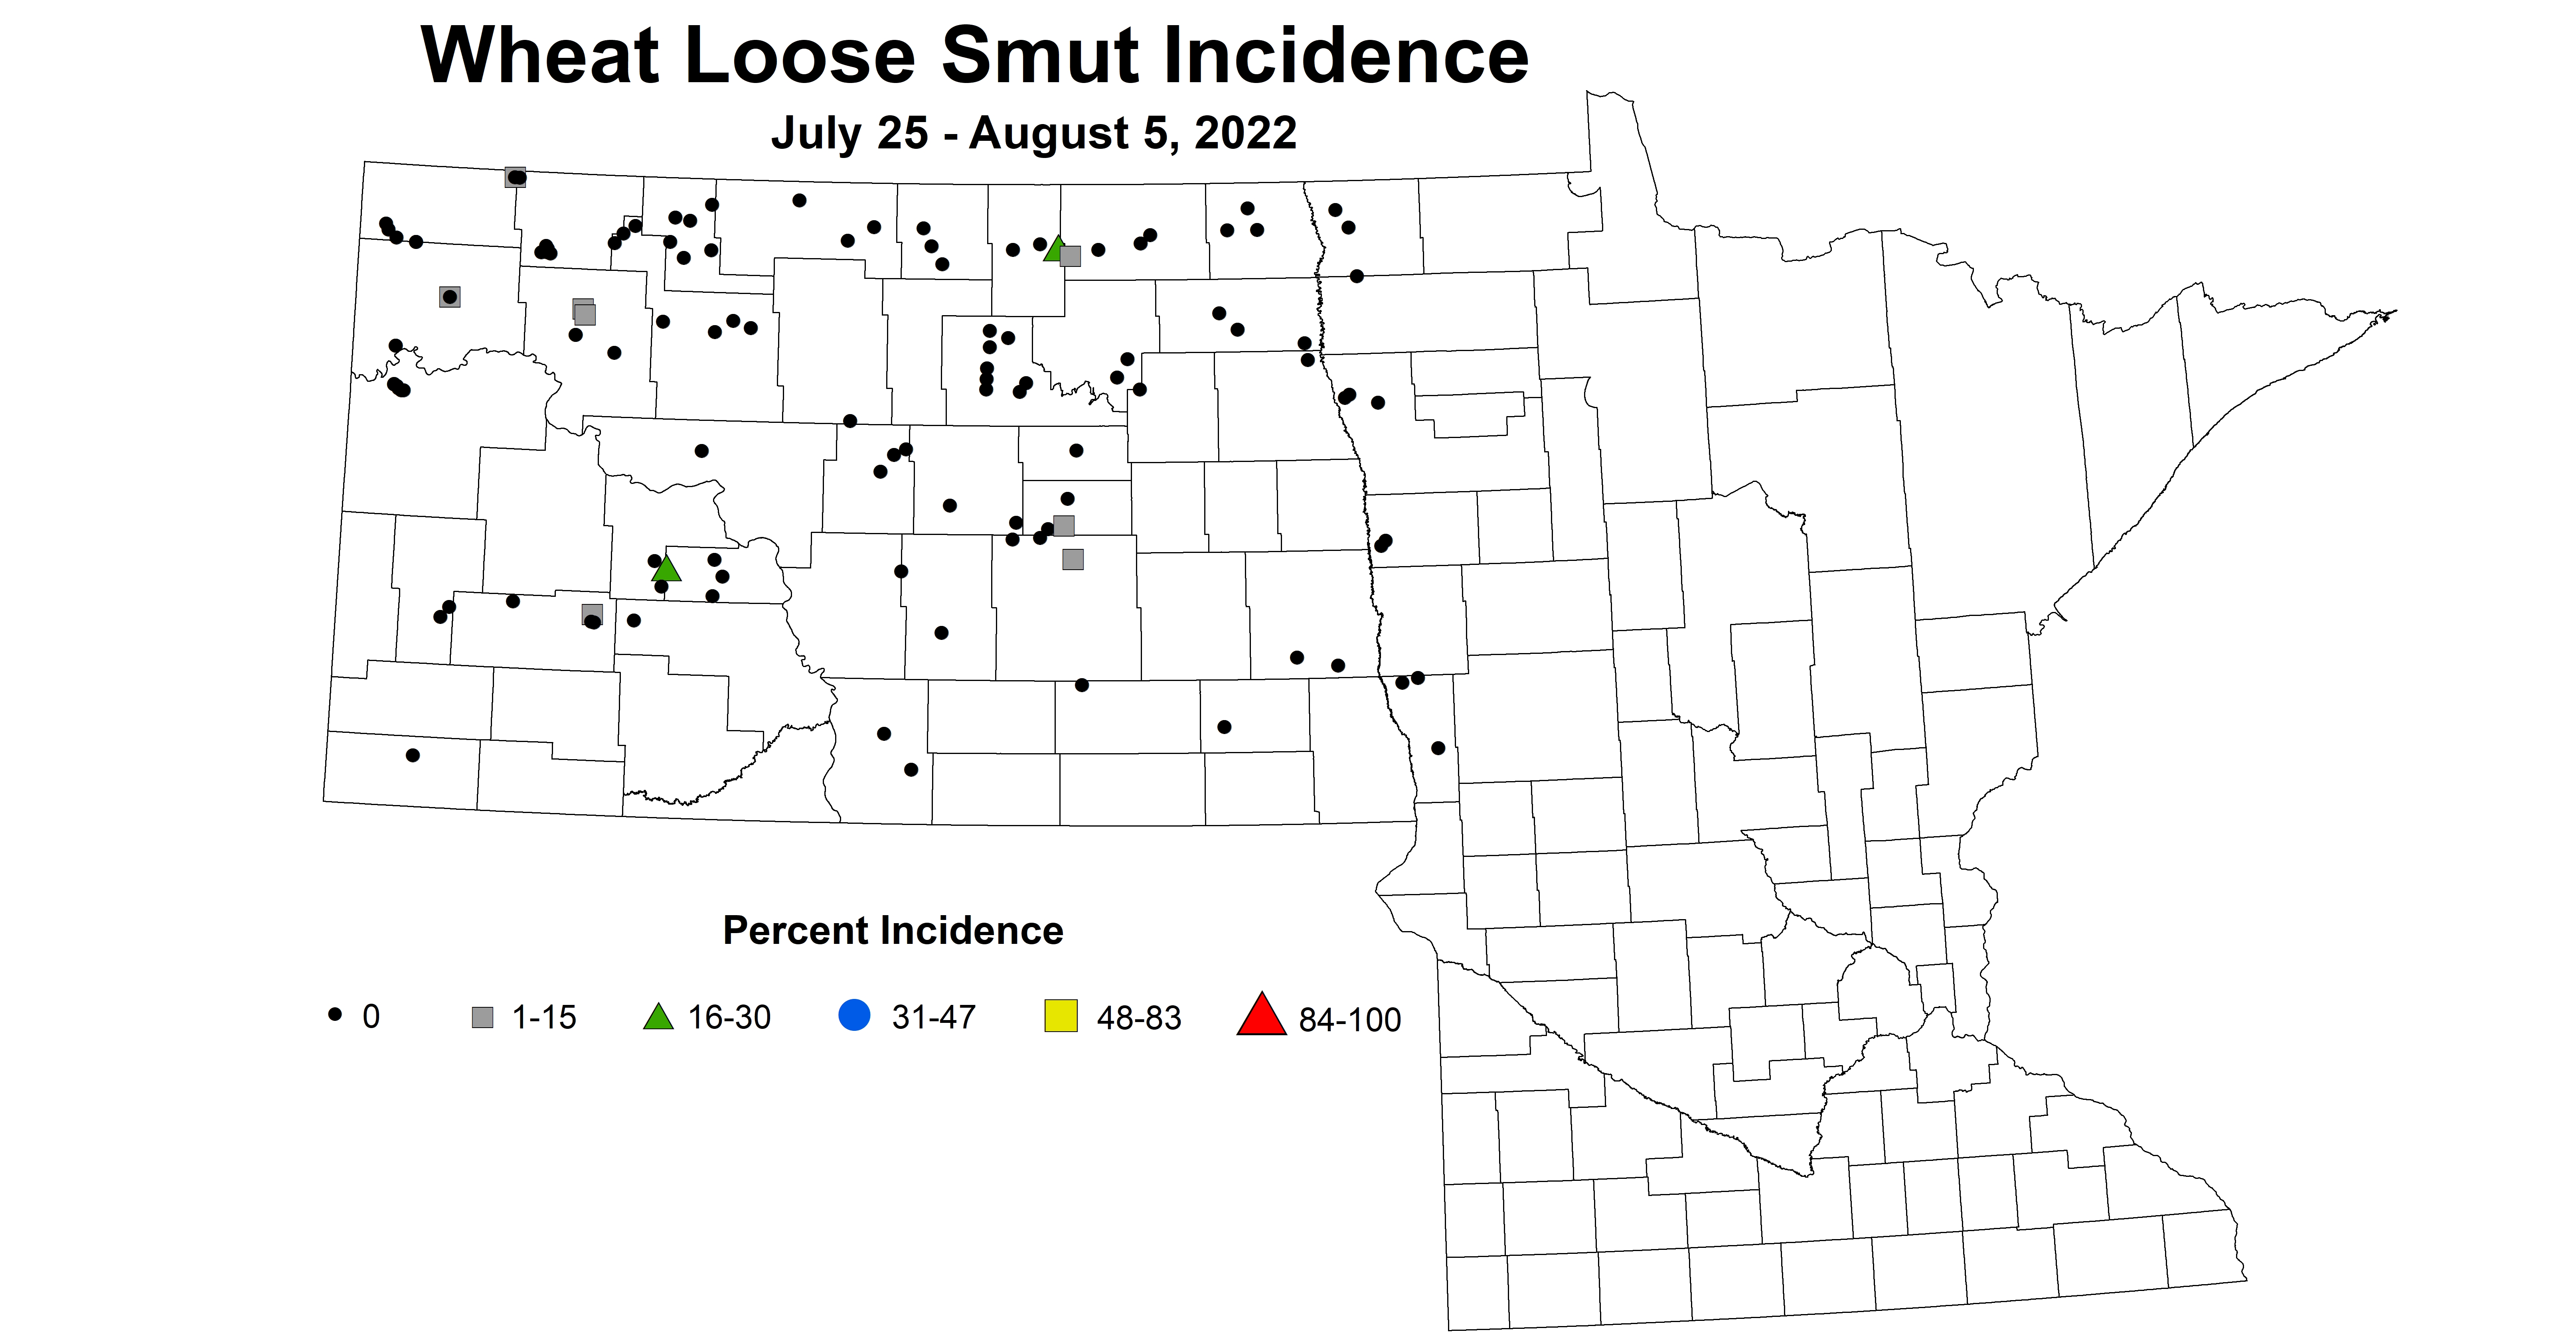 wheat loose smut incidence 2022 7.25-8.5